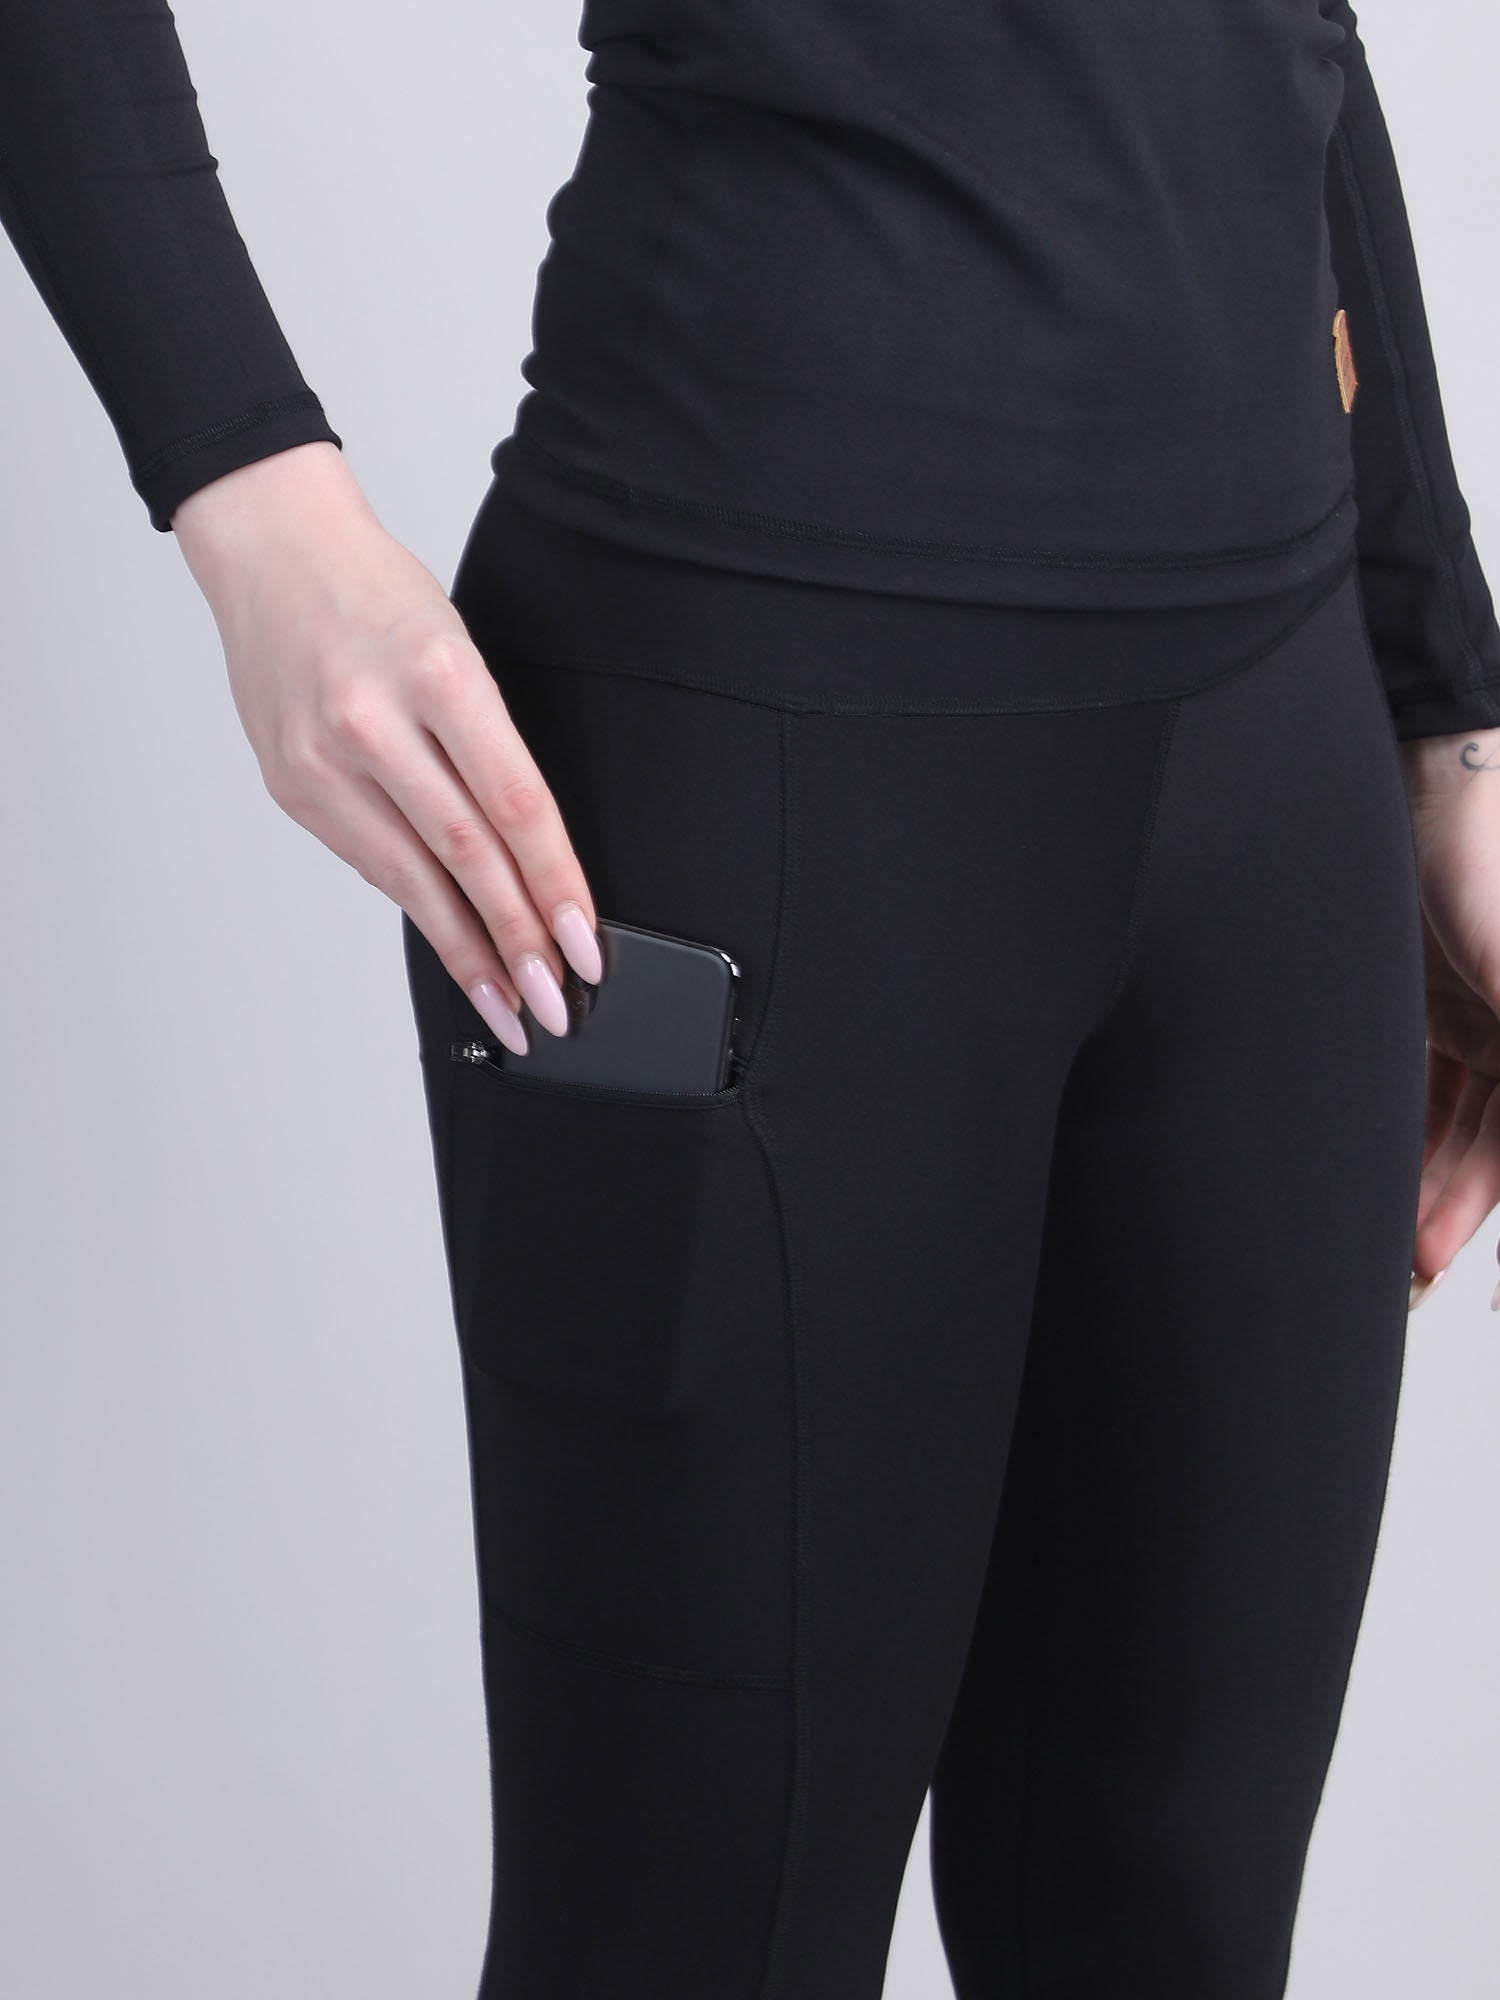 gym pants for ladies with Pockets